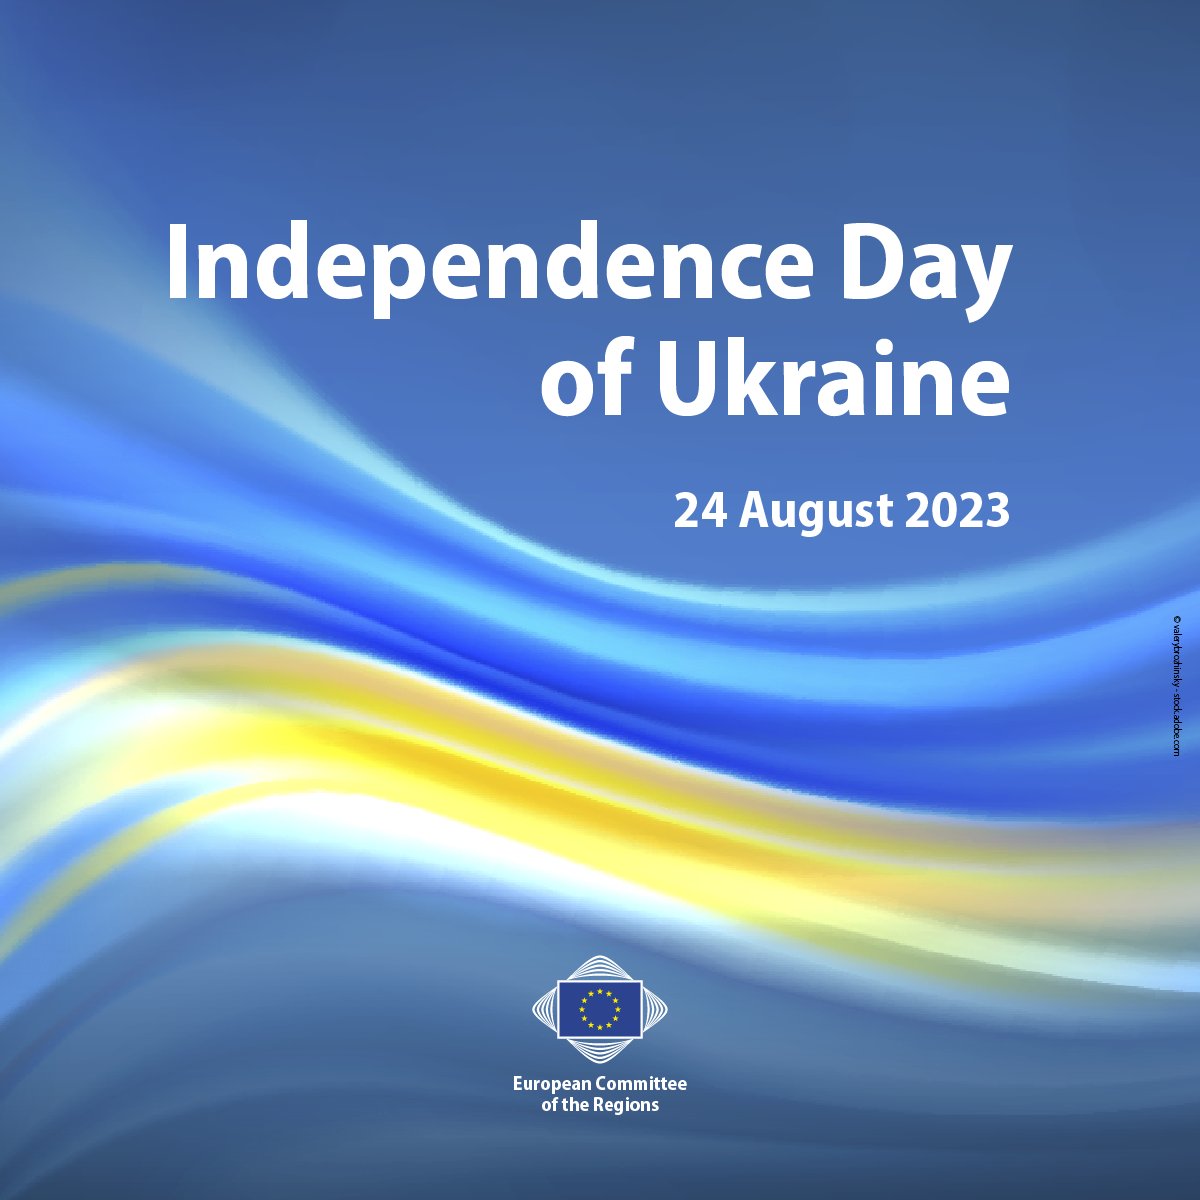 Independent. Free. 

The resources, means, and solidarity of European cities and regions will be there for Ukraine until these two words are, once again, restored to reality.

#StandWithUkraine
#UkraineAlliance